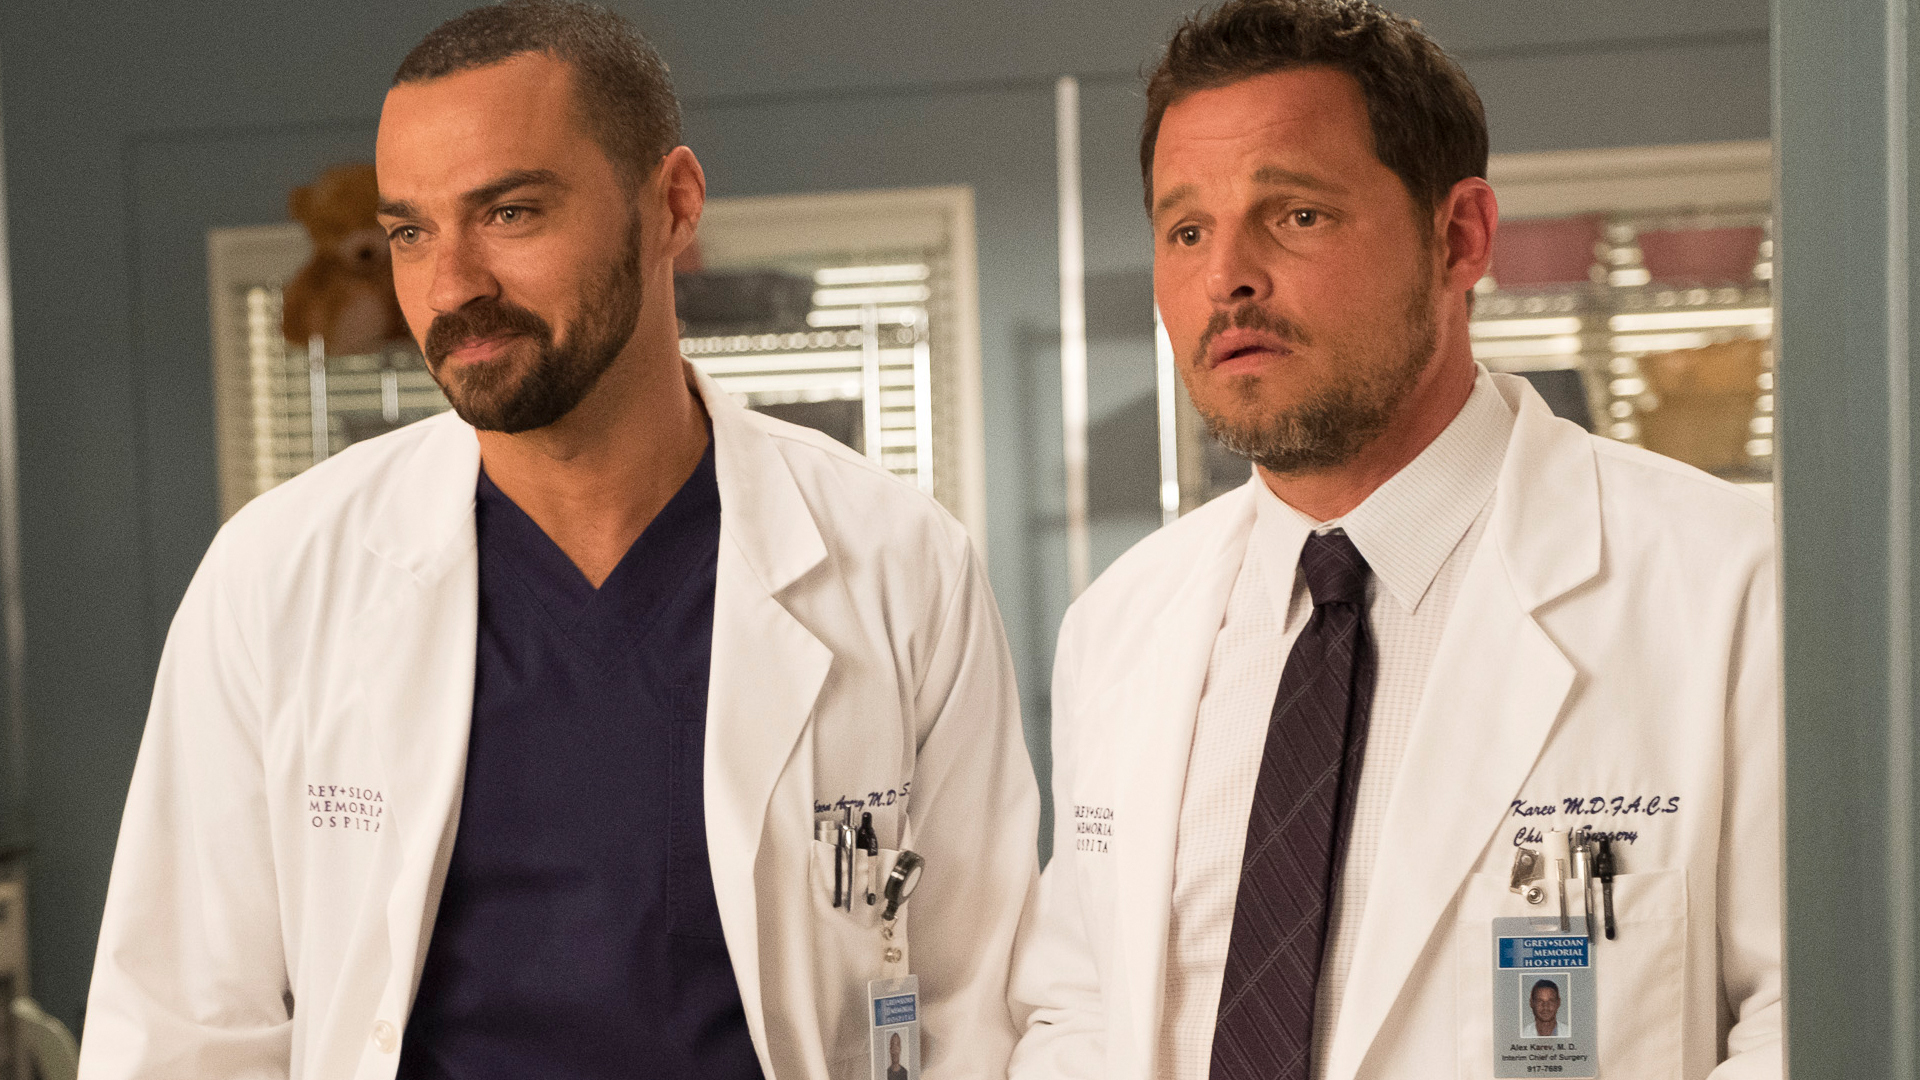 Greys anatomy jesse williams says alex karevs exit will form and sever relationships